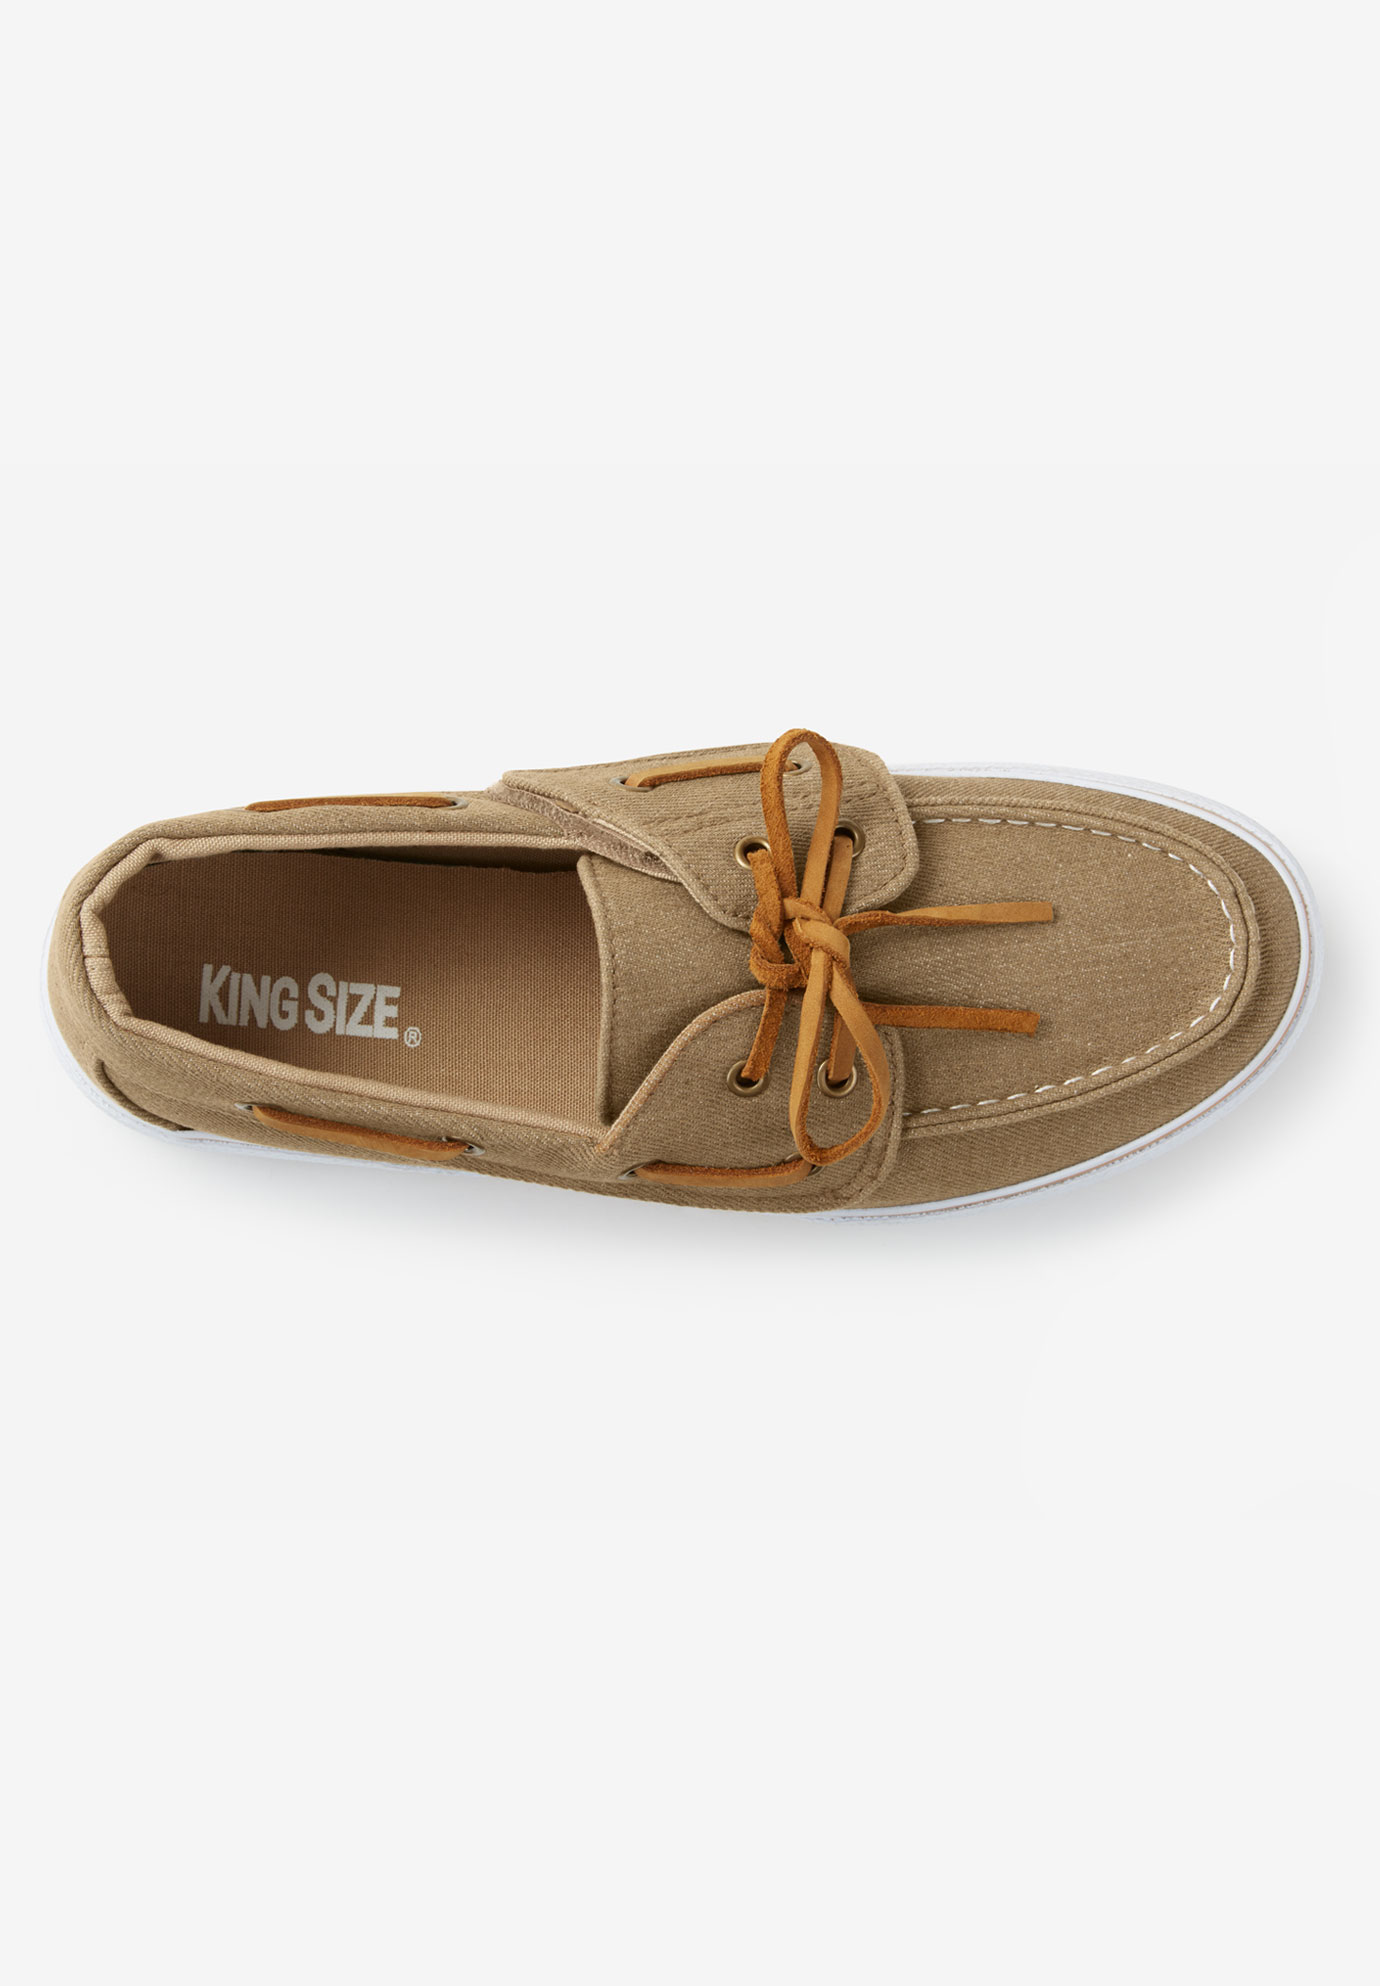 Kingsize Men's Big & Tall Canvas Boat Shoe Loafers Shoes - image 3 of 6